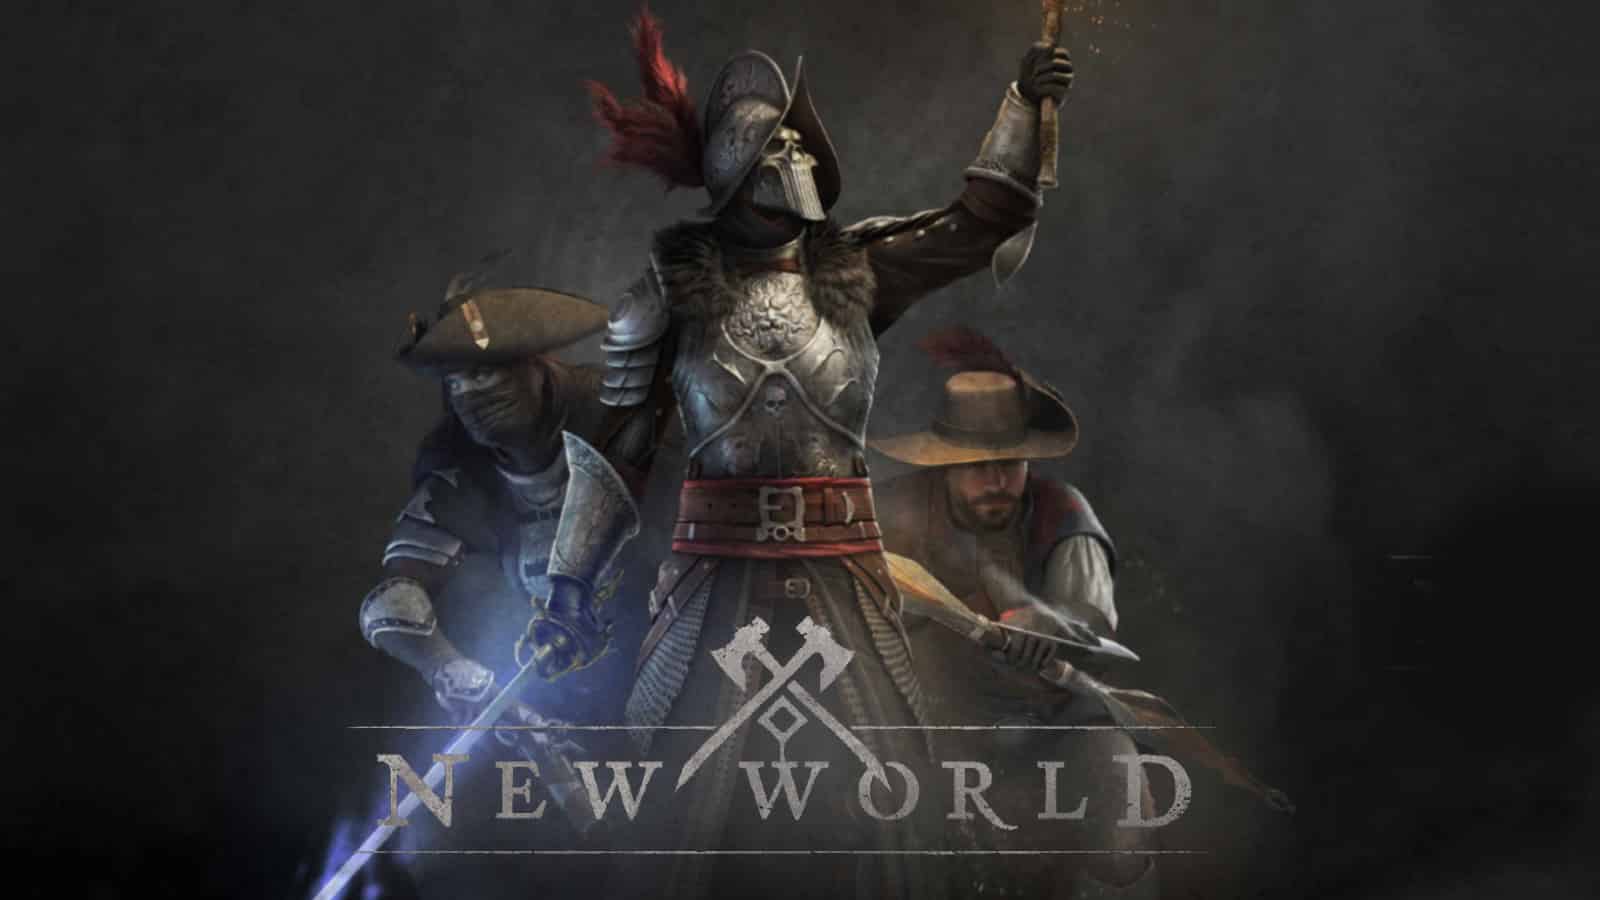 New World warriors on black and grey background